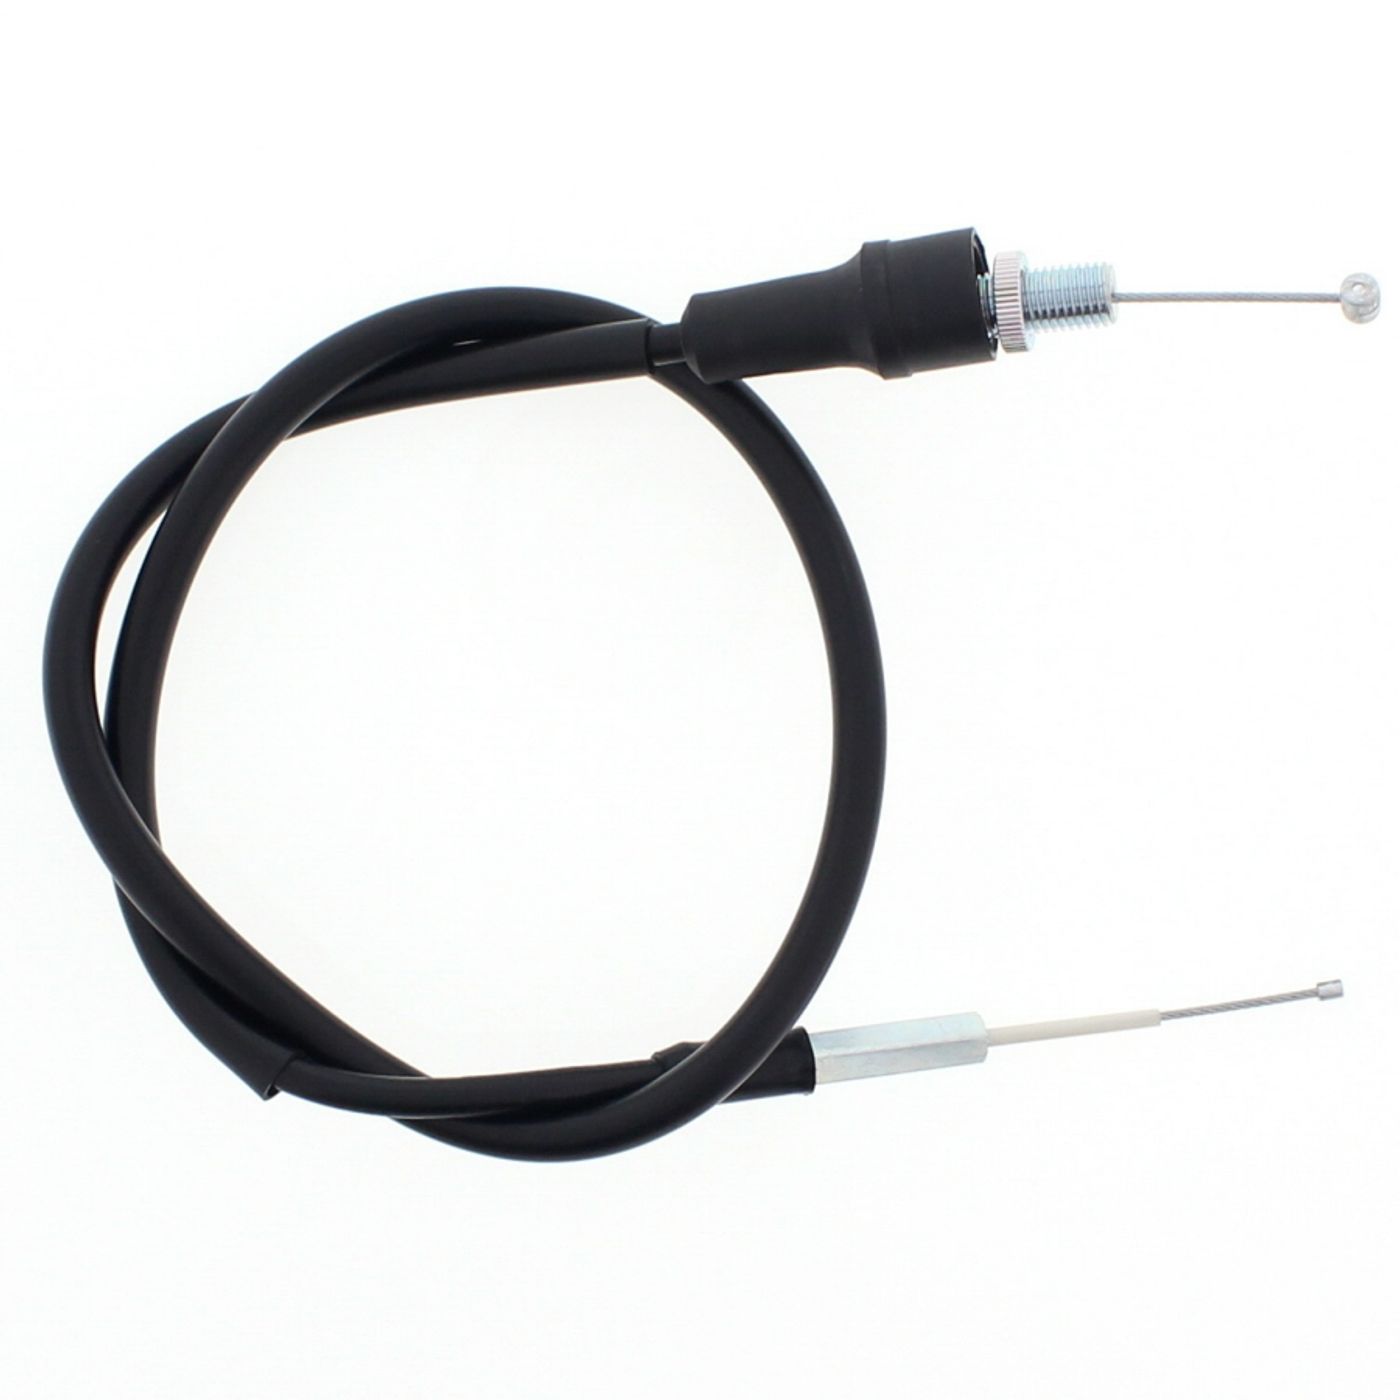 Wrp Throttle Cables - WRP451190 image